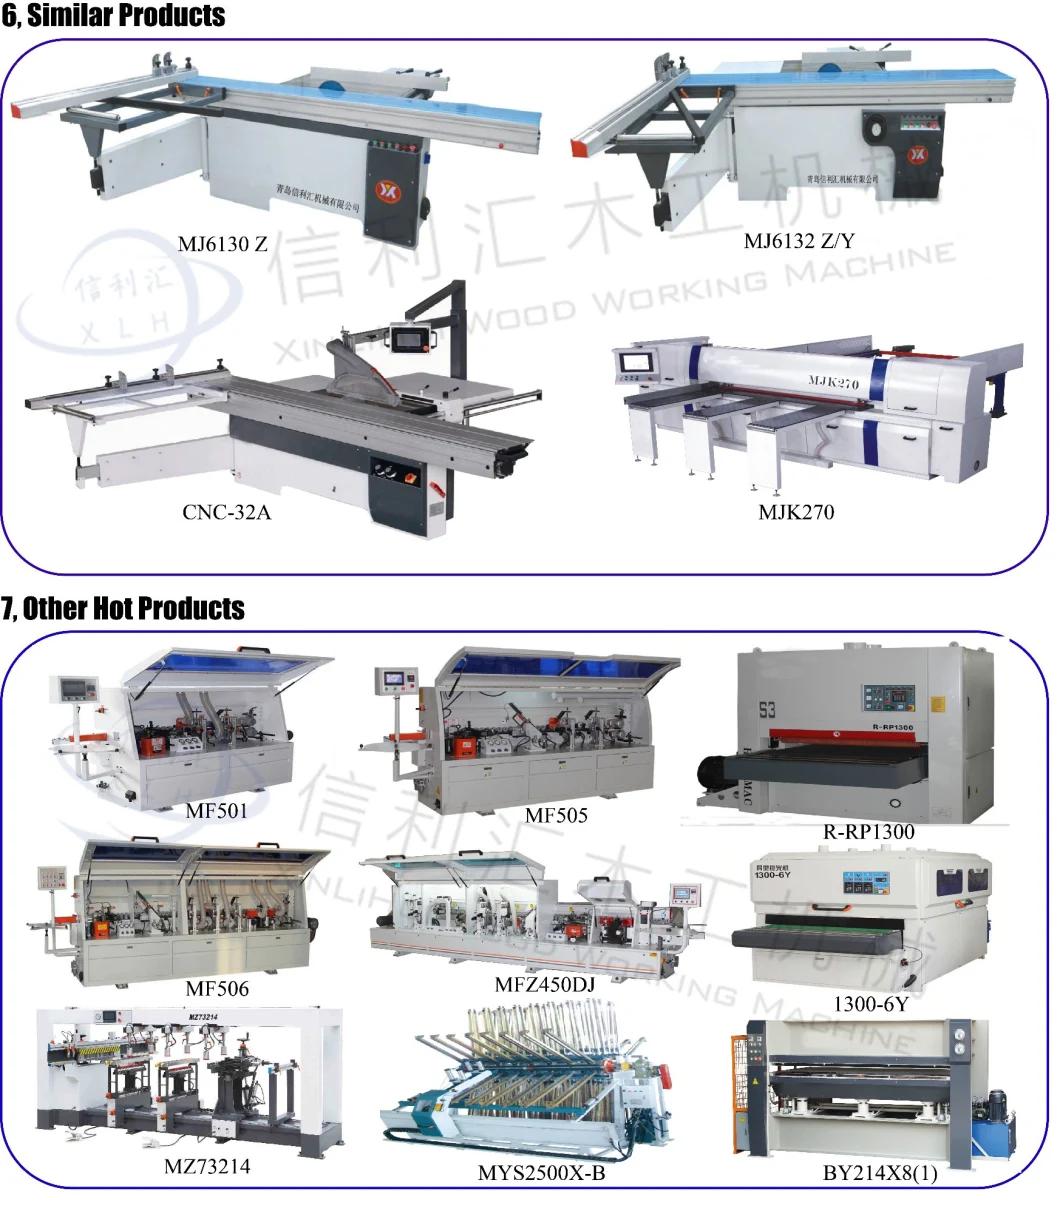 Plywiid Enge Machines Plywood Sheet Cutting Machines, Plywood Enge Machines, Sezionatrice for Ply Wood in China